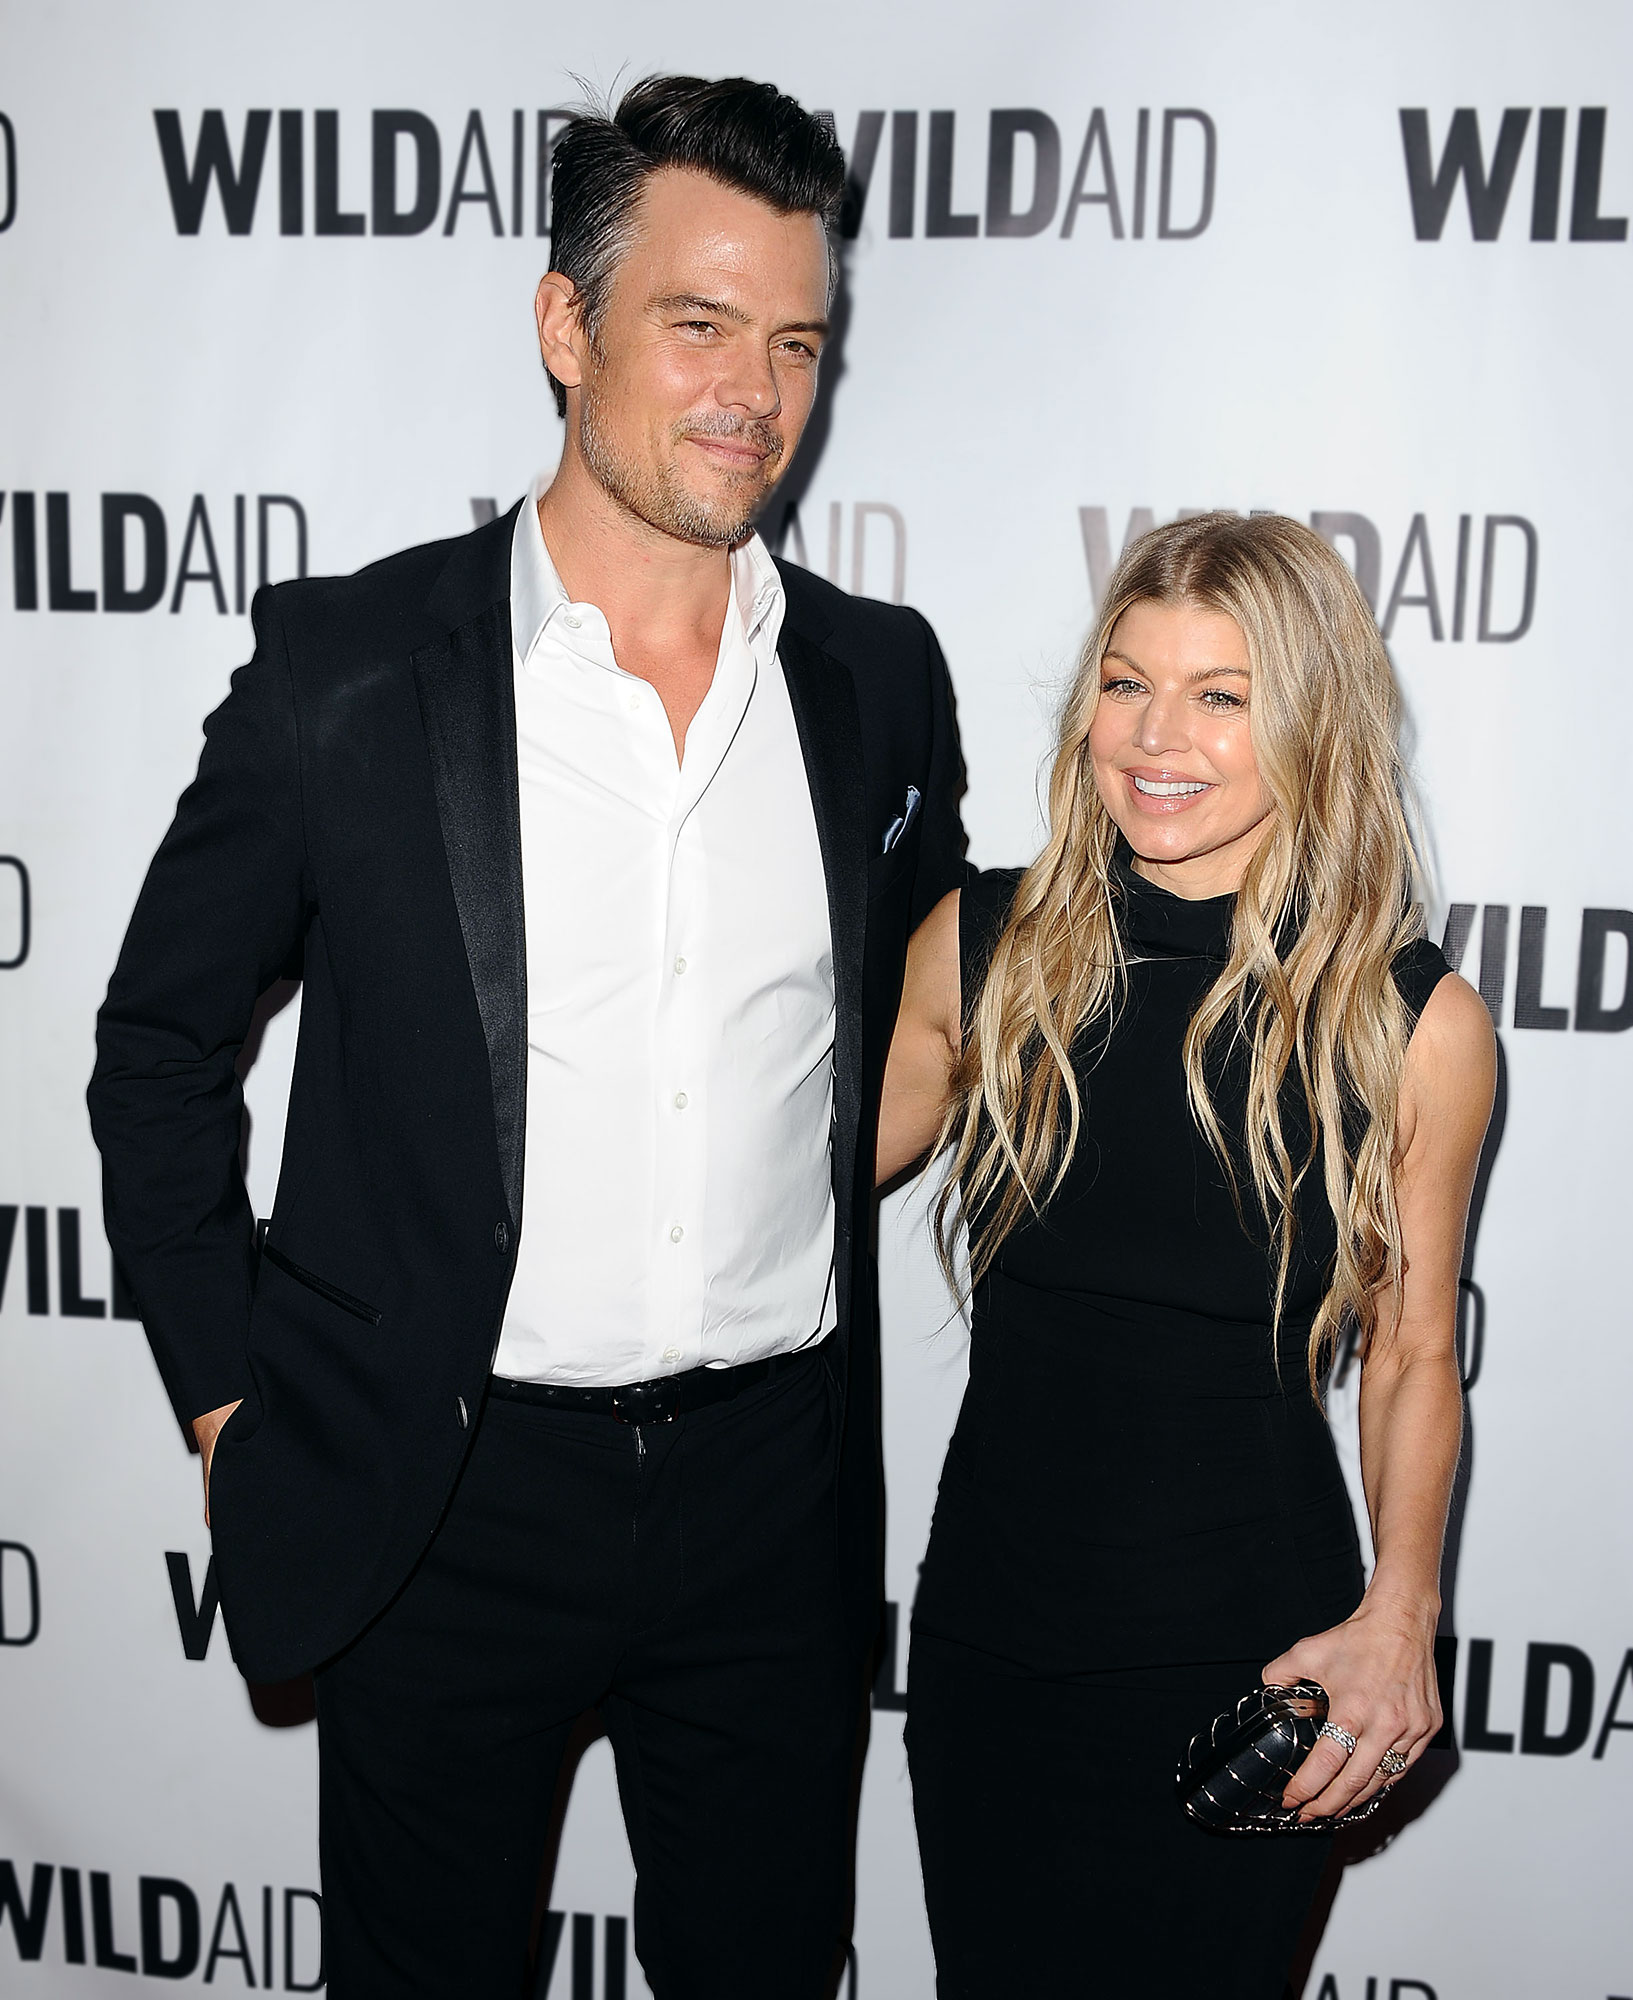 Where Is The Love? Fergie and Josh Duhamel Split After 8 Years of Marriage